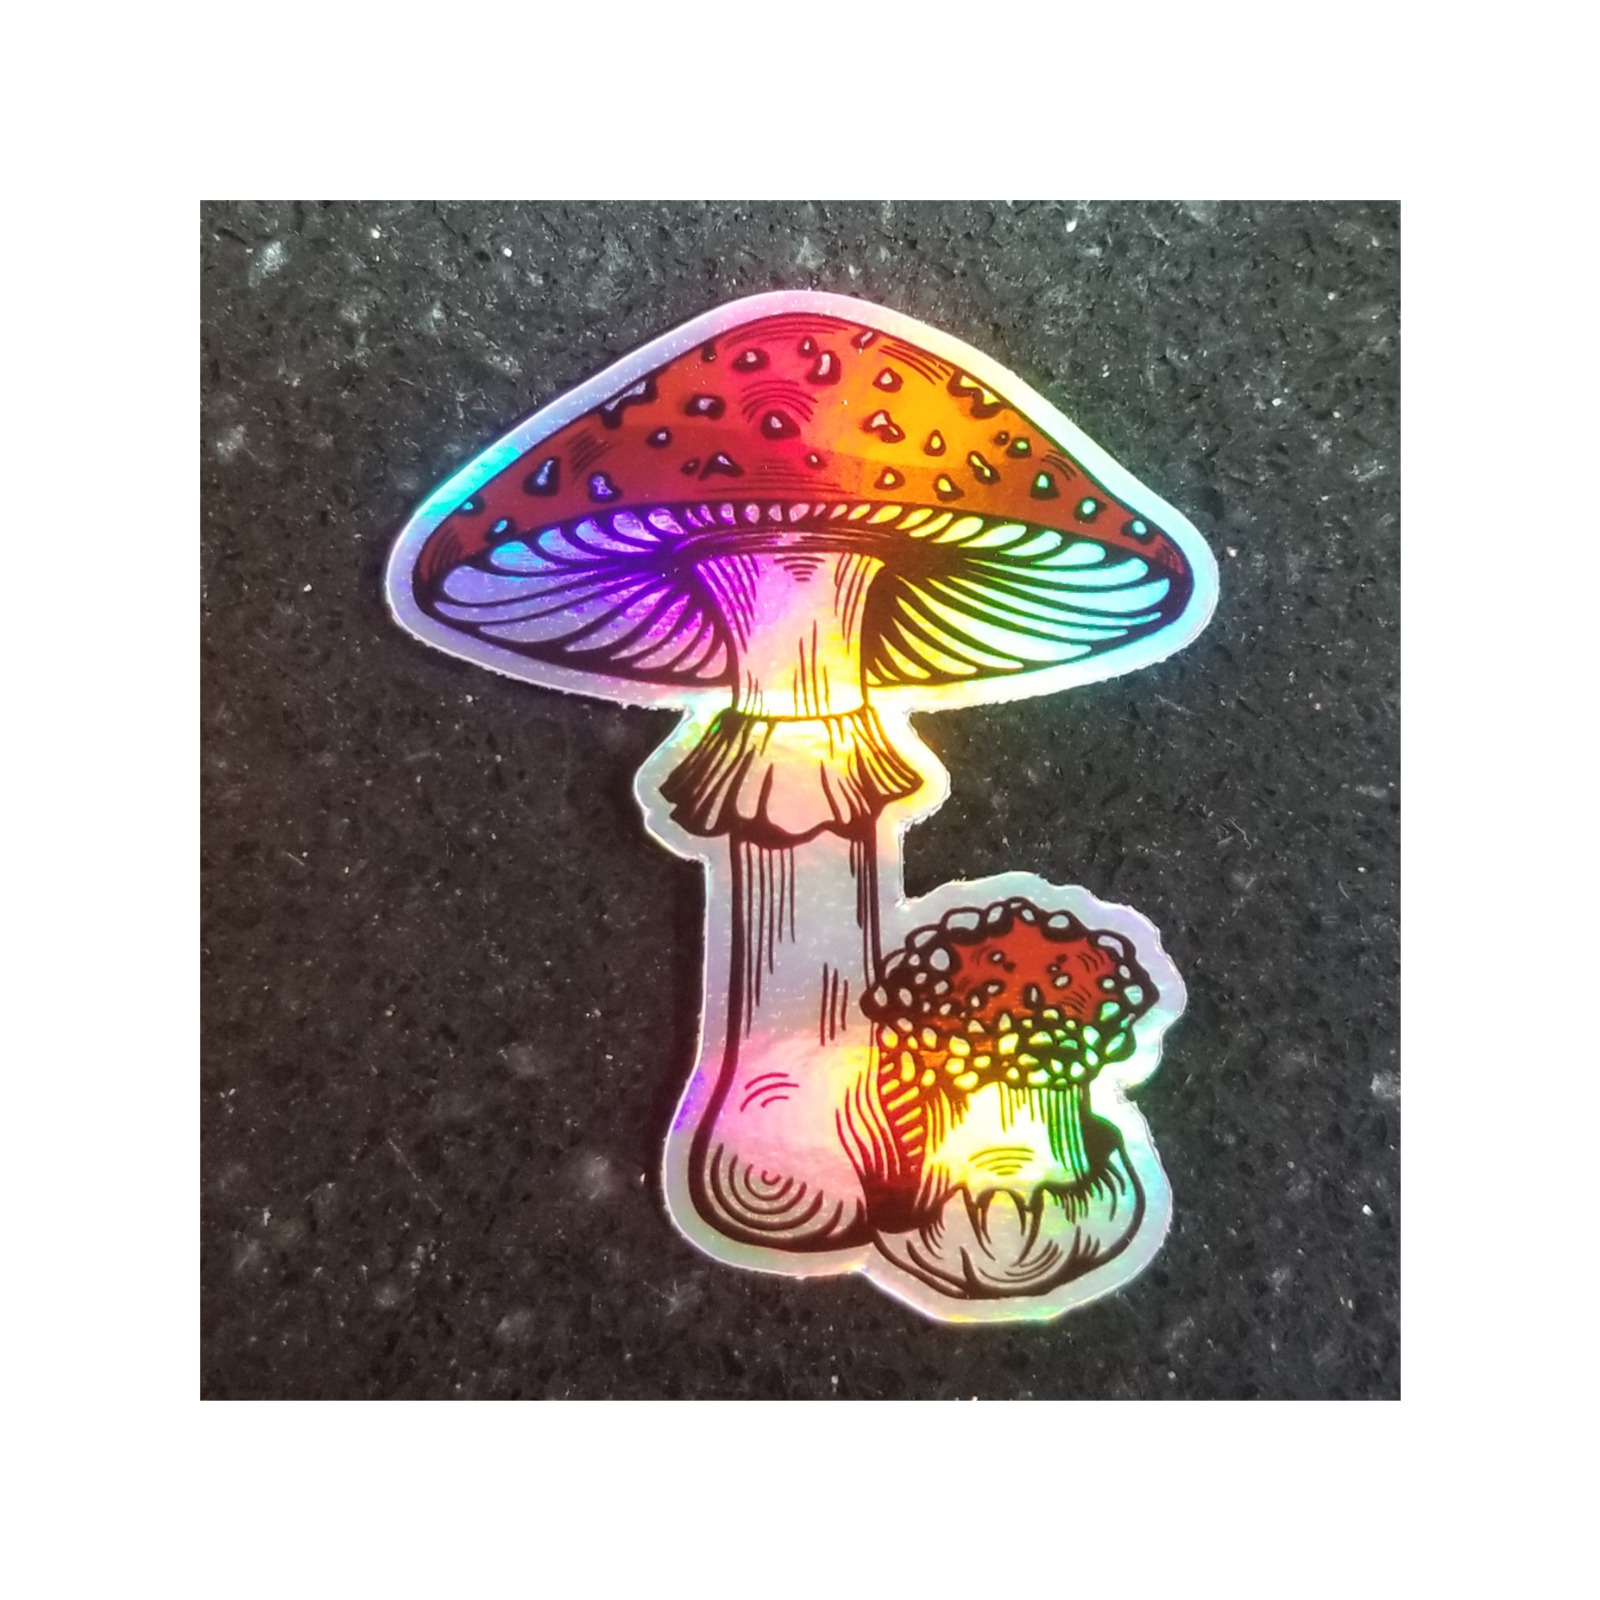 Mushroom Sticker Holographic Hologram Magic Hippie Psychedelic Hippy Stickers 3